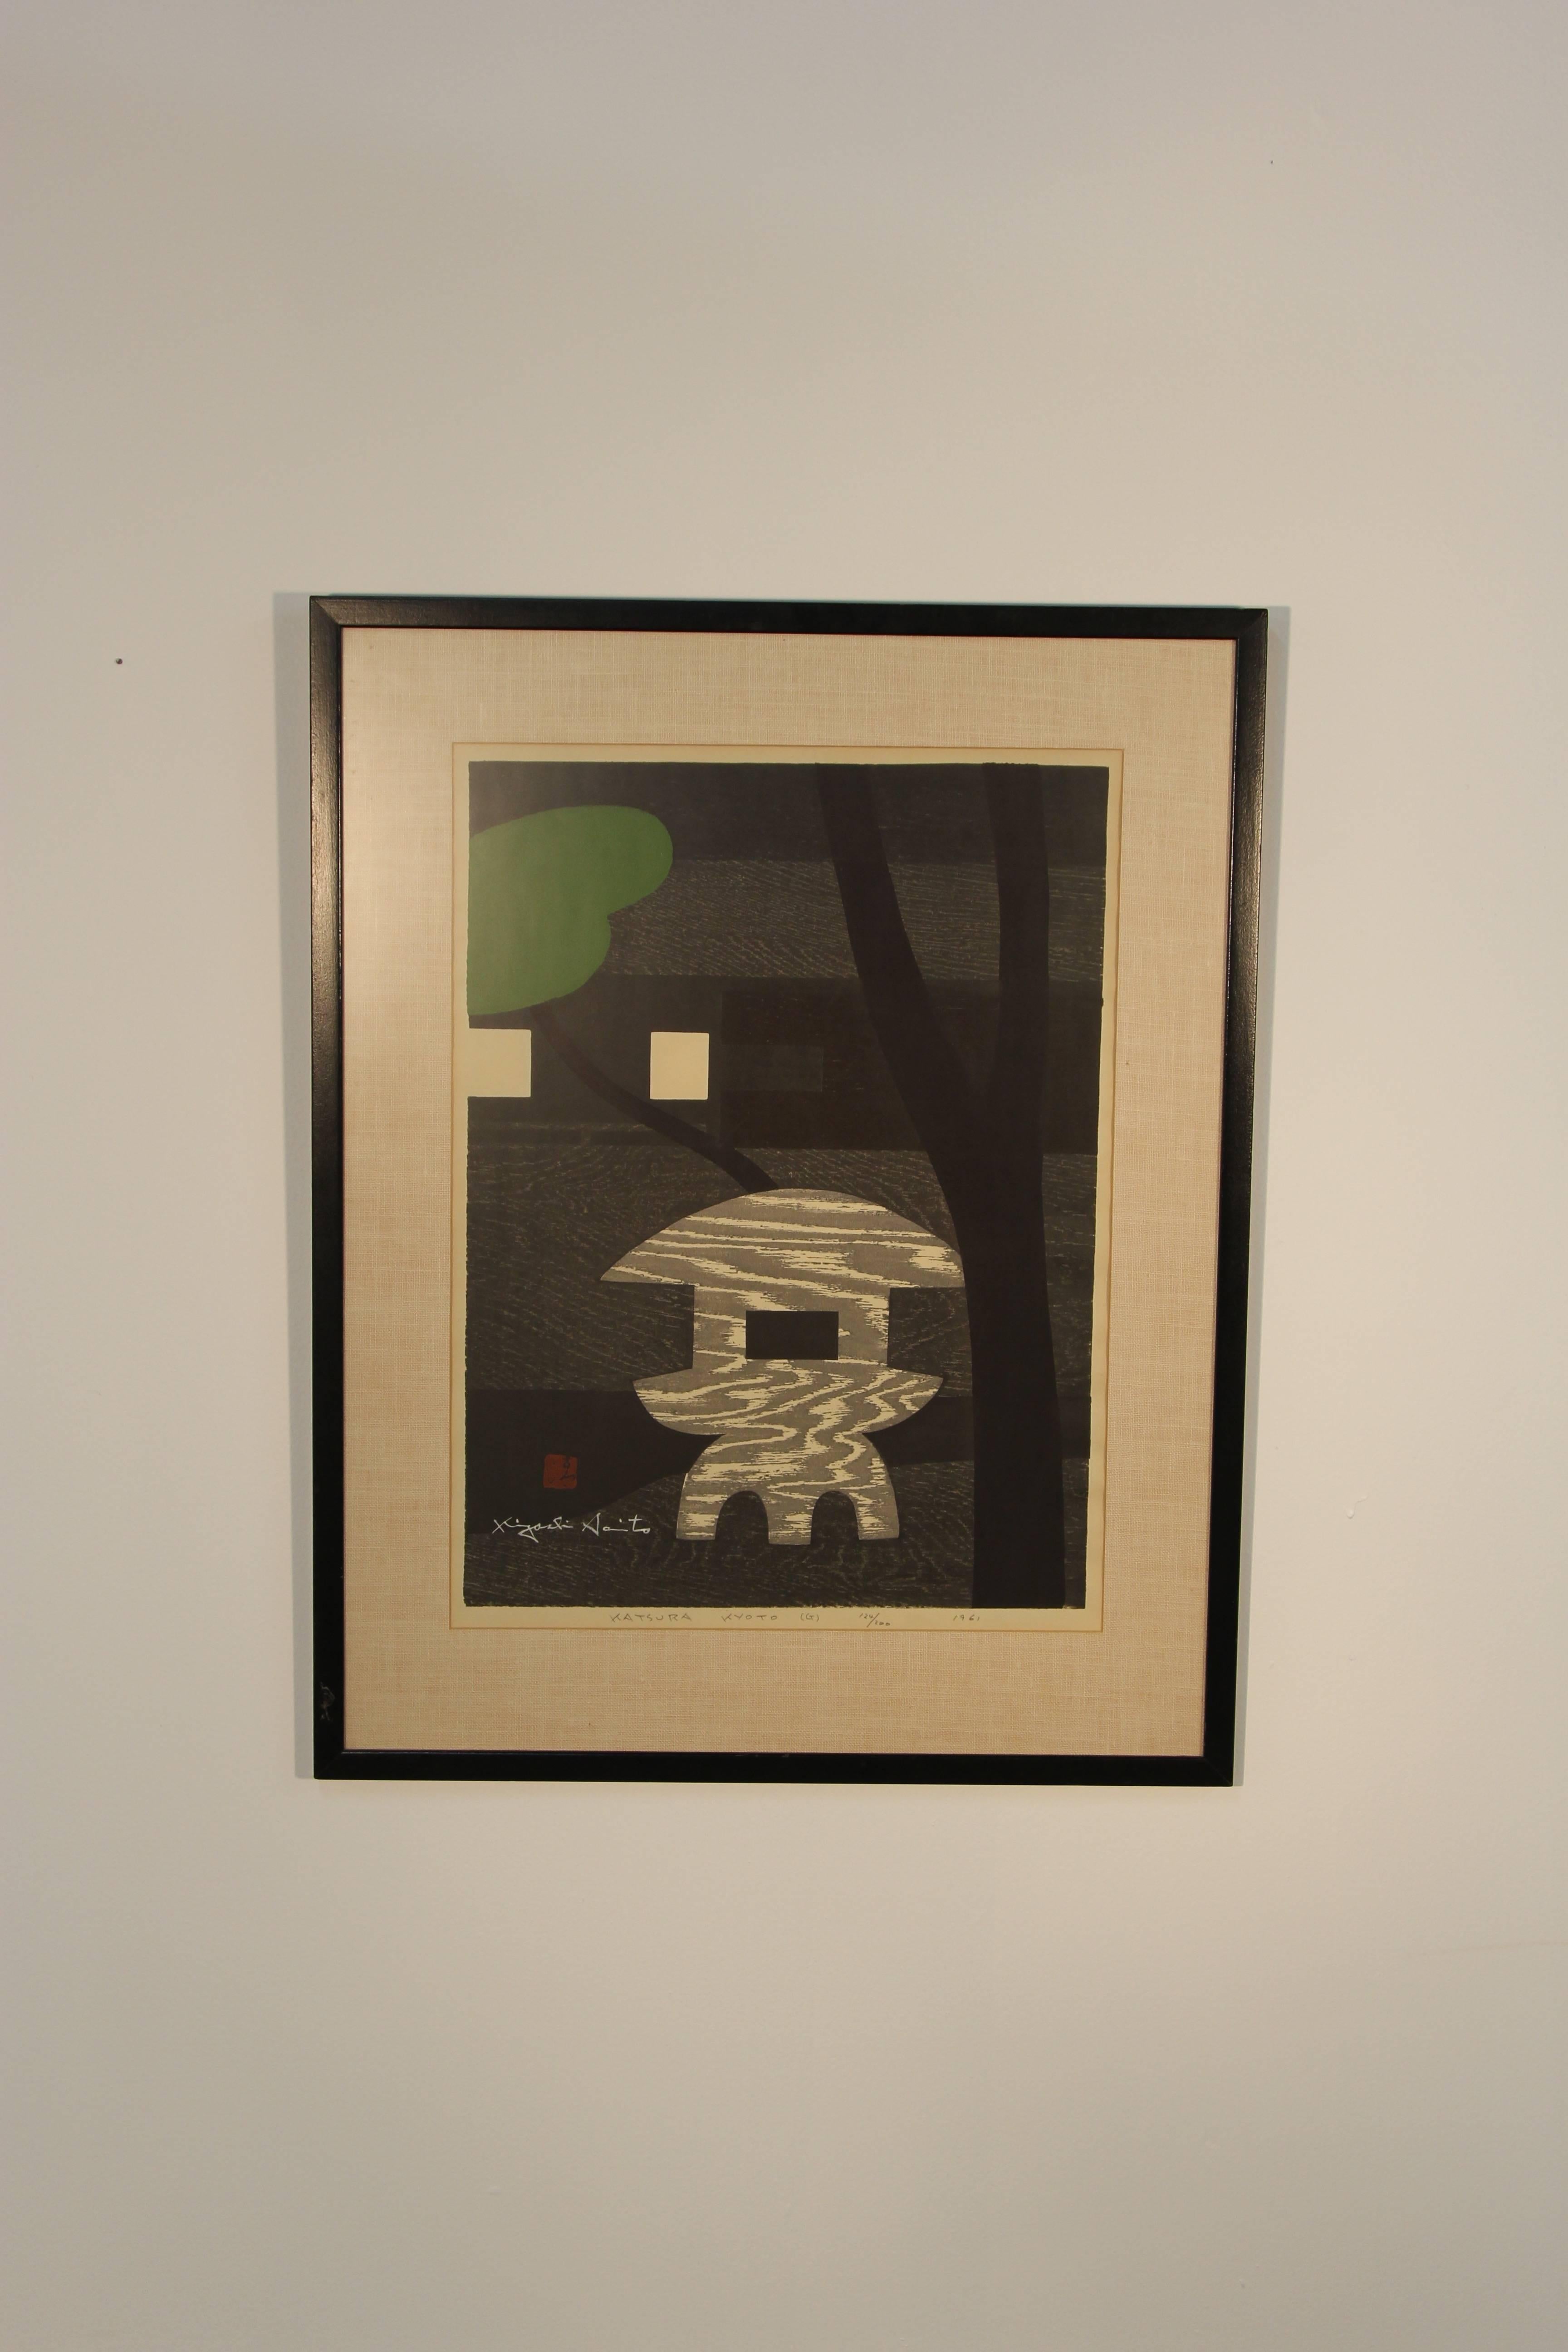 Katsura Kyoto edition 124 of series 200 signed in pencil and also the woodblock. Abstract trees and temple framed with linen mat under non-glare glass.